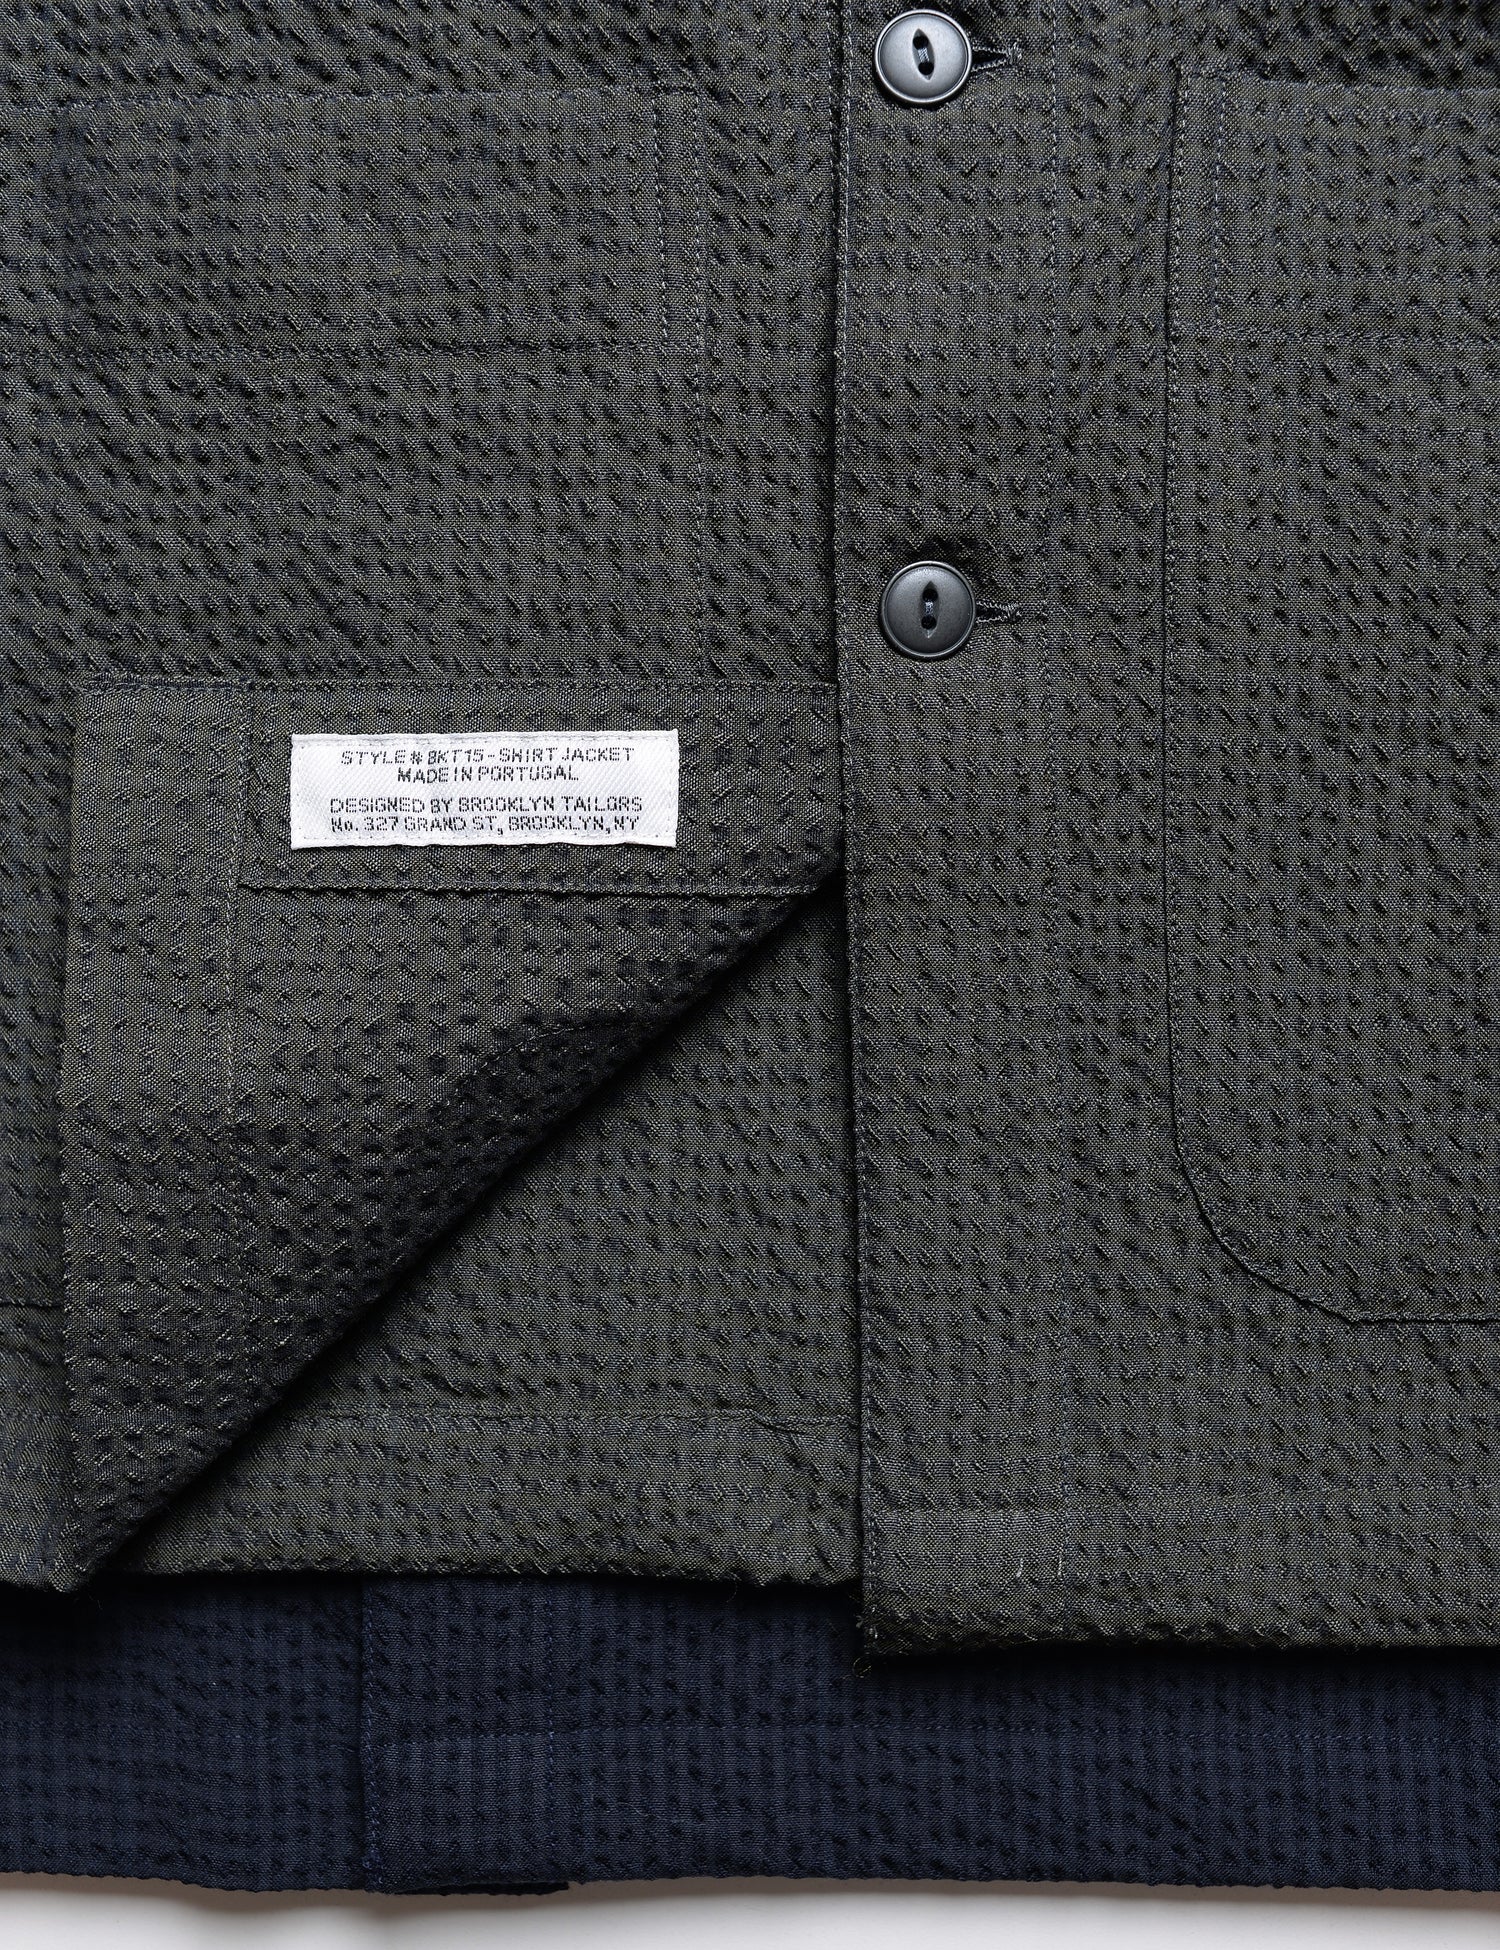 Detail shot of hem and interior labeling for Brooklyn Tailors BKT15 Shirt Jacket in Crinkled Wool & Cotton - Storm